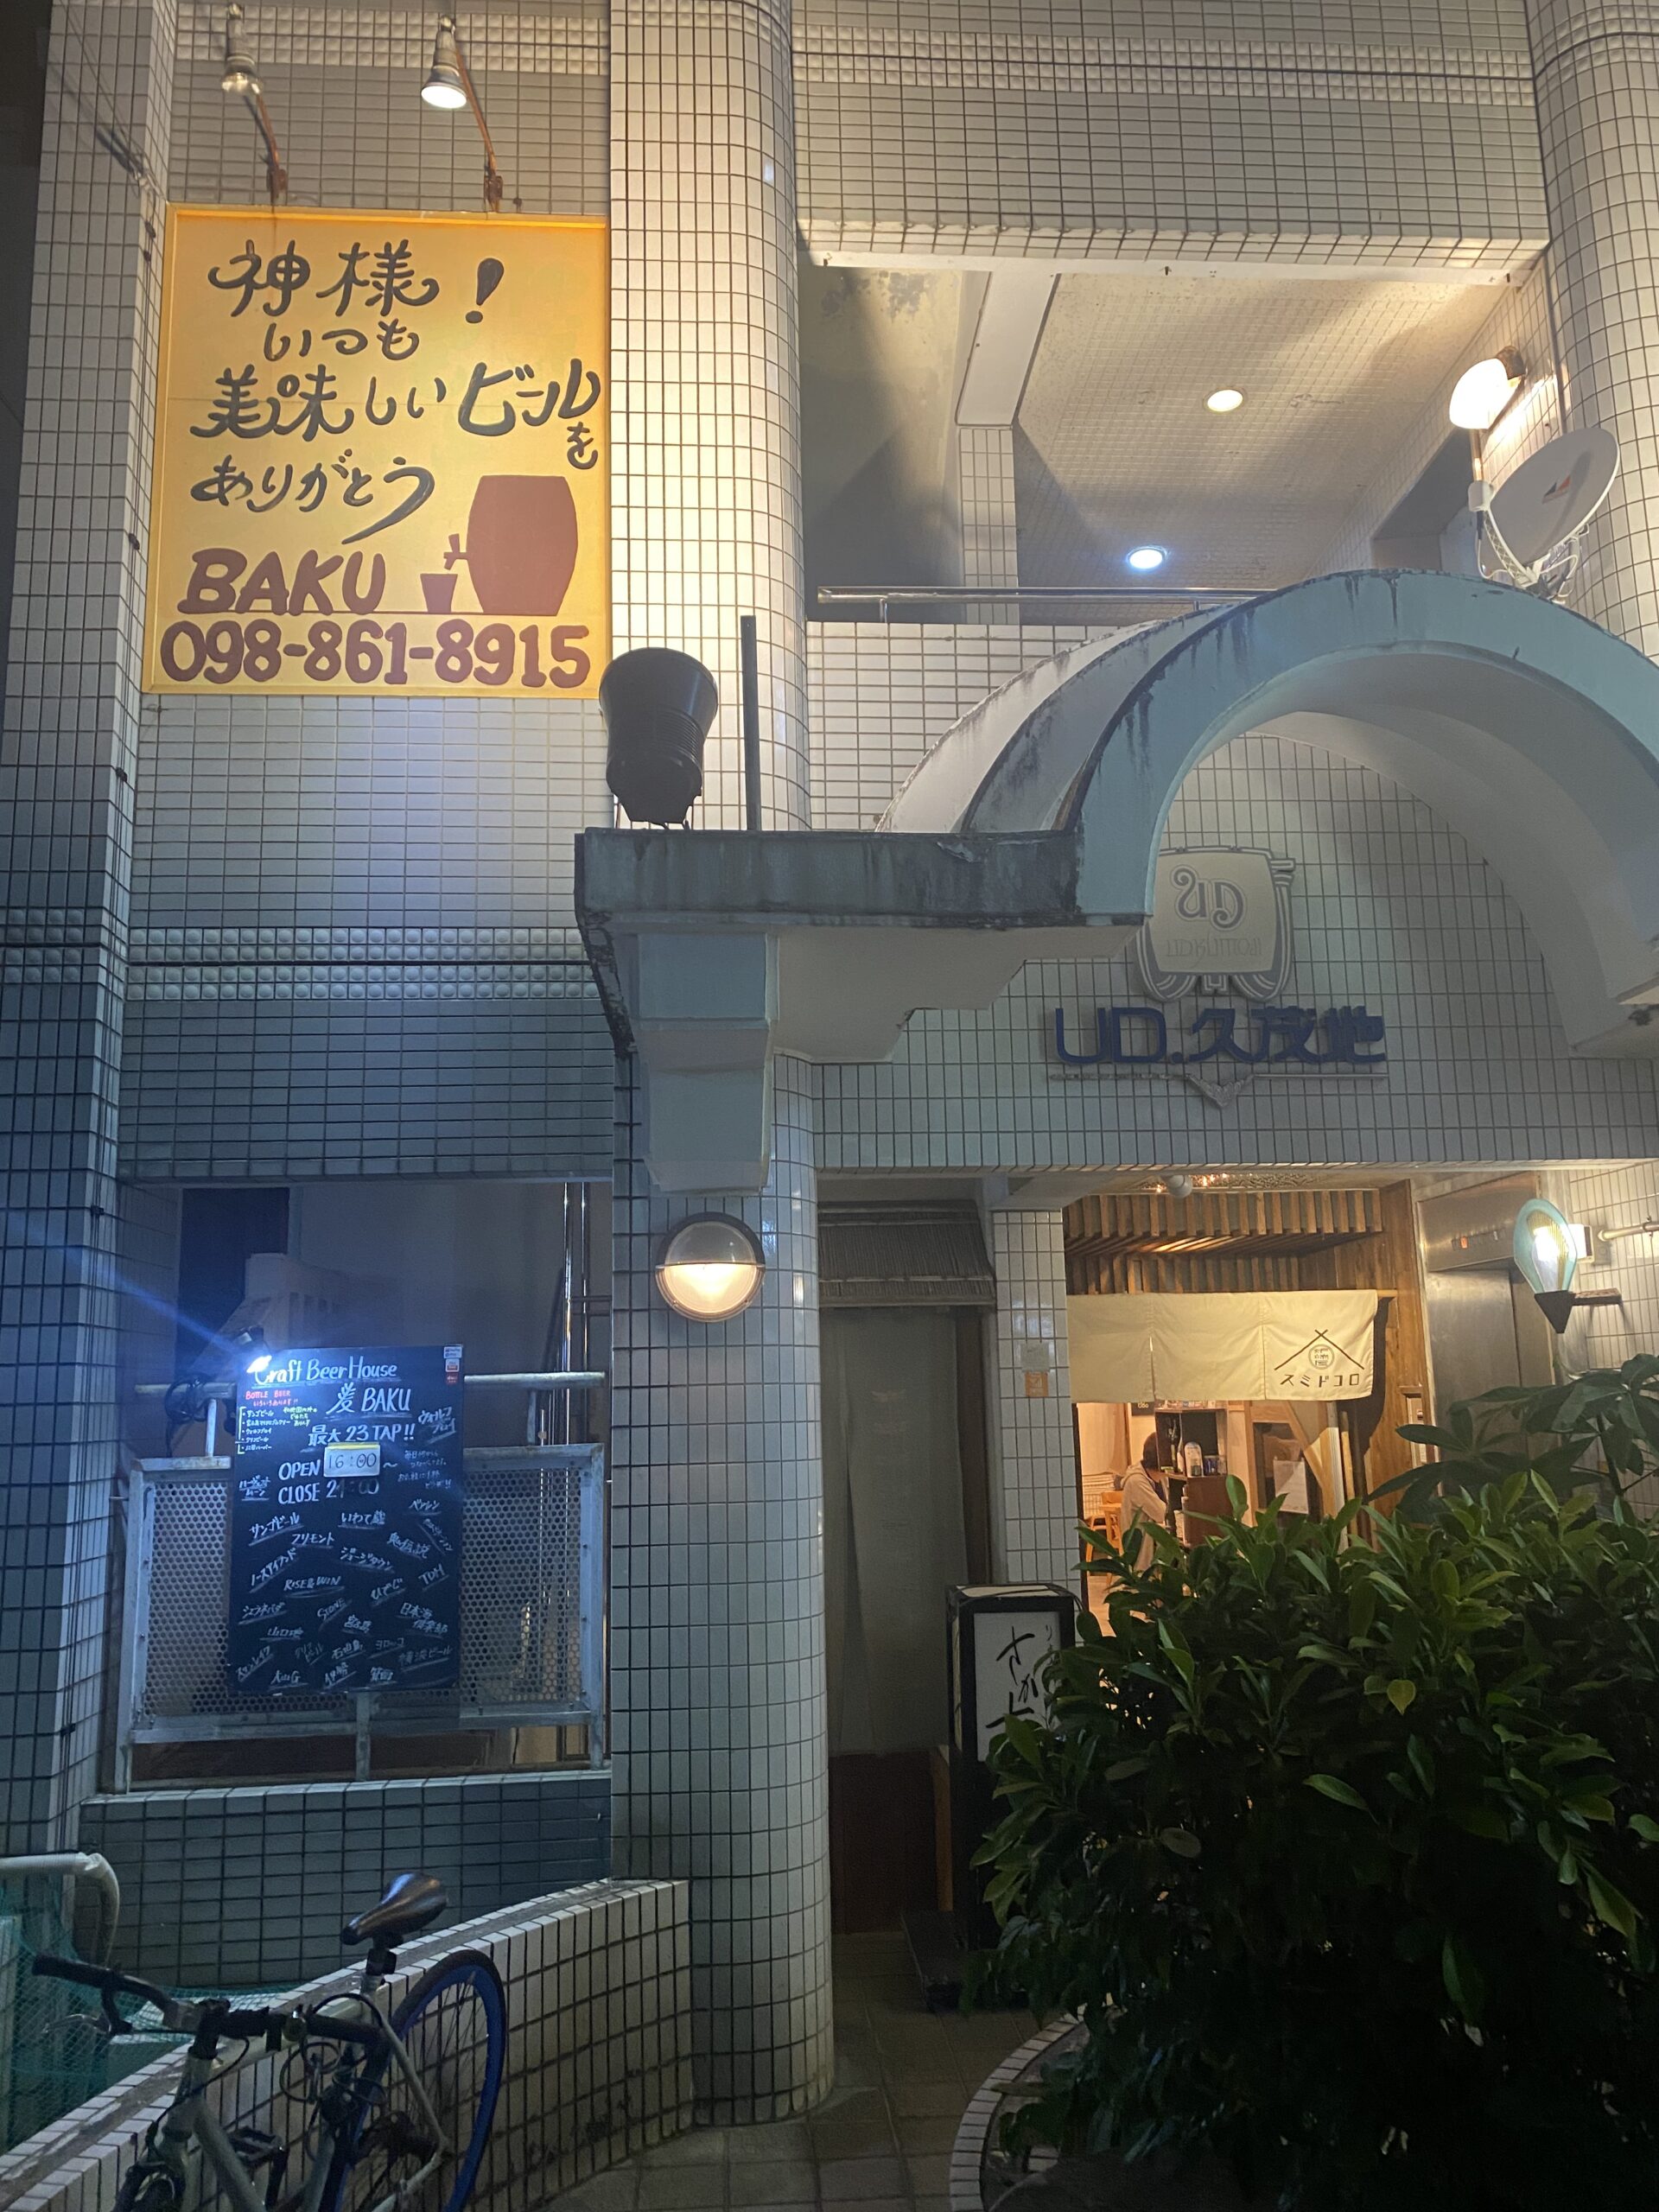 【Okinawa】Craft Beer House BAKU|If you want to drink craft beer on Kokusai-dori, this is the place!